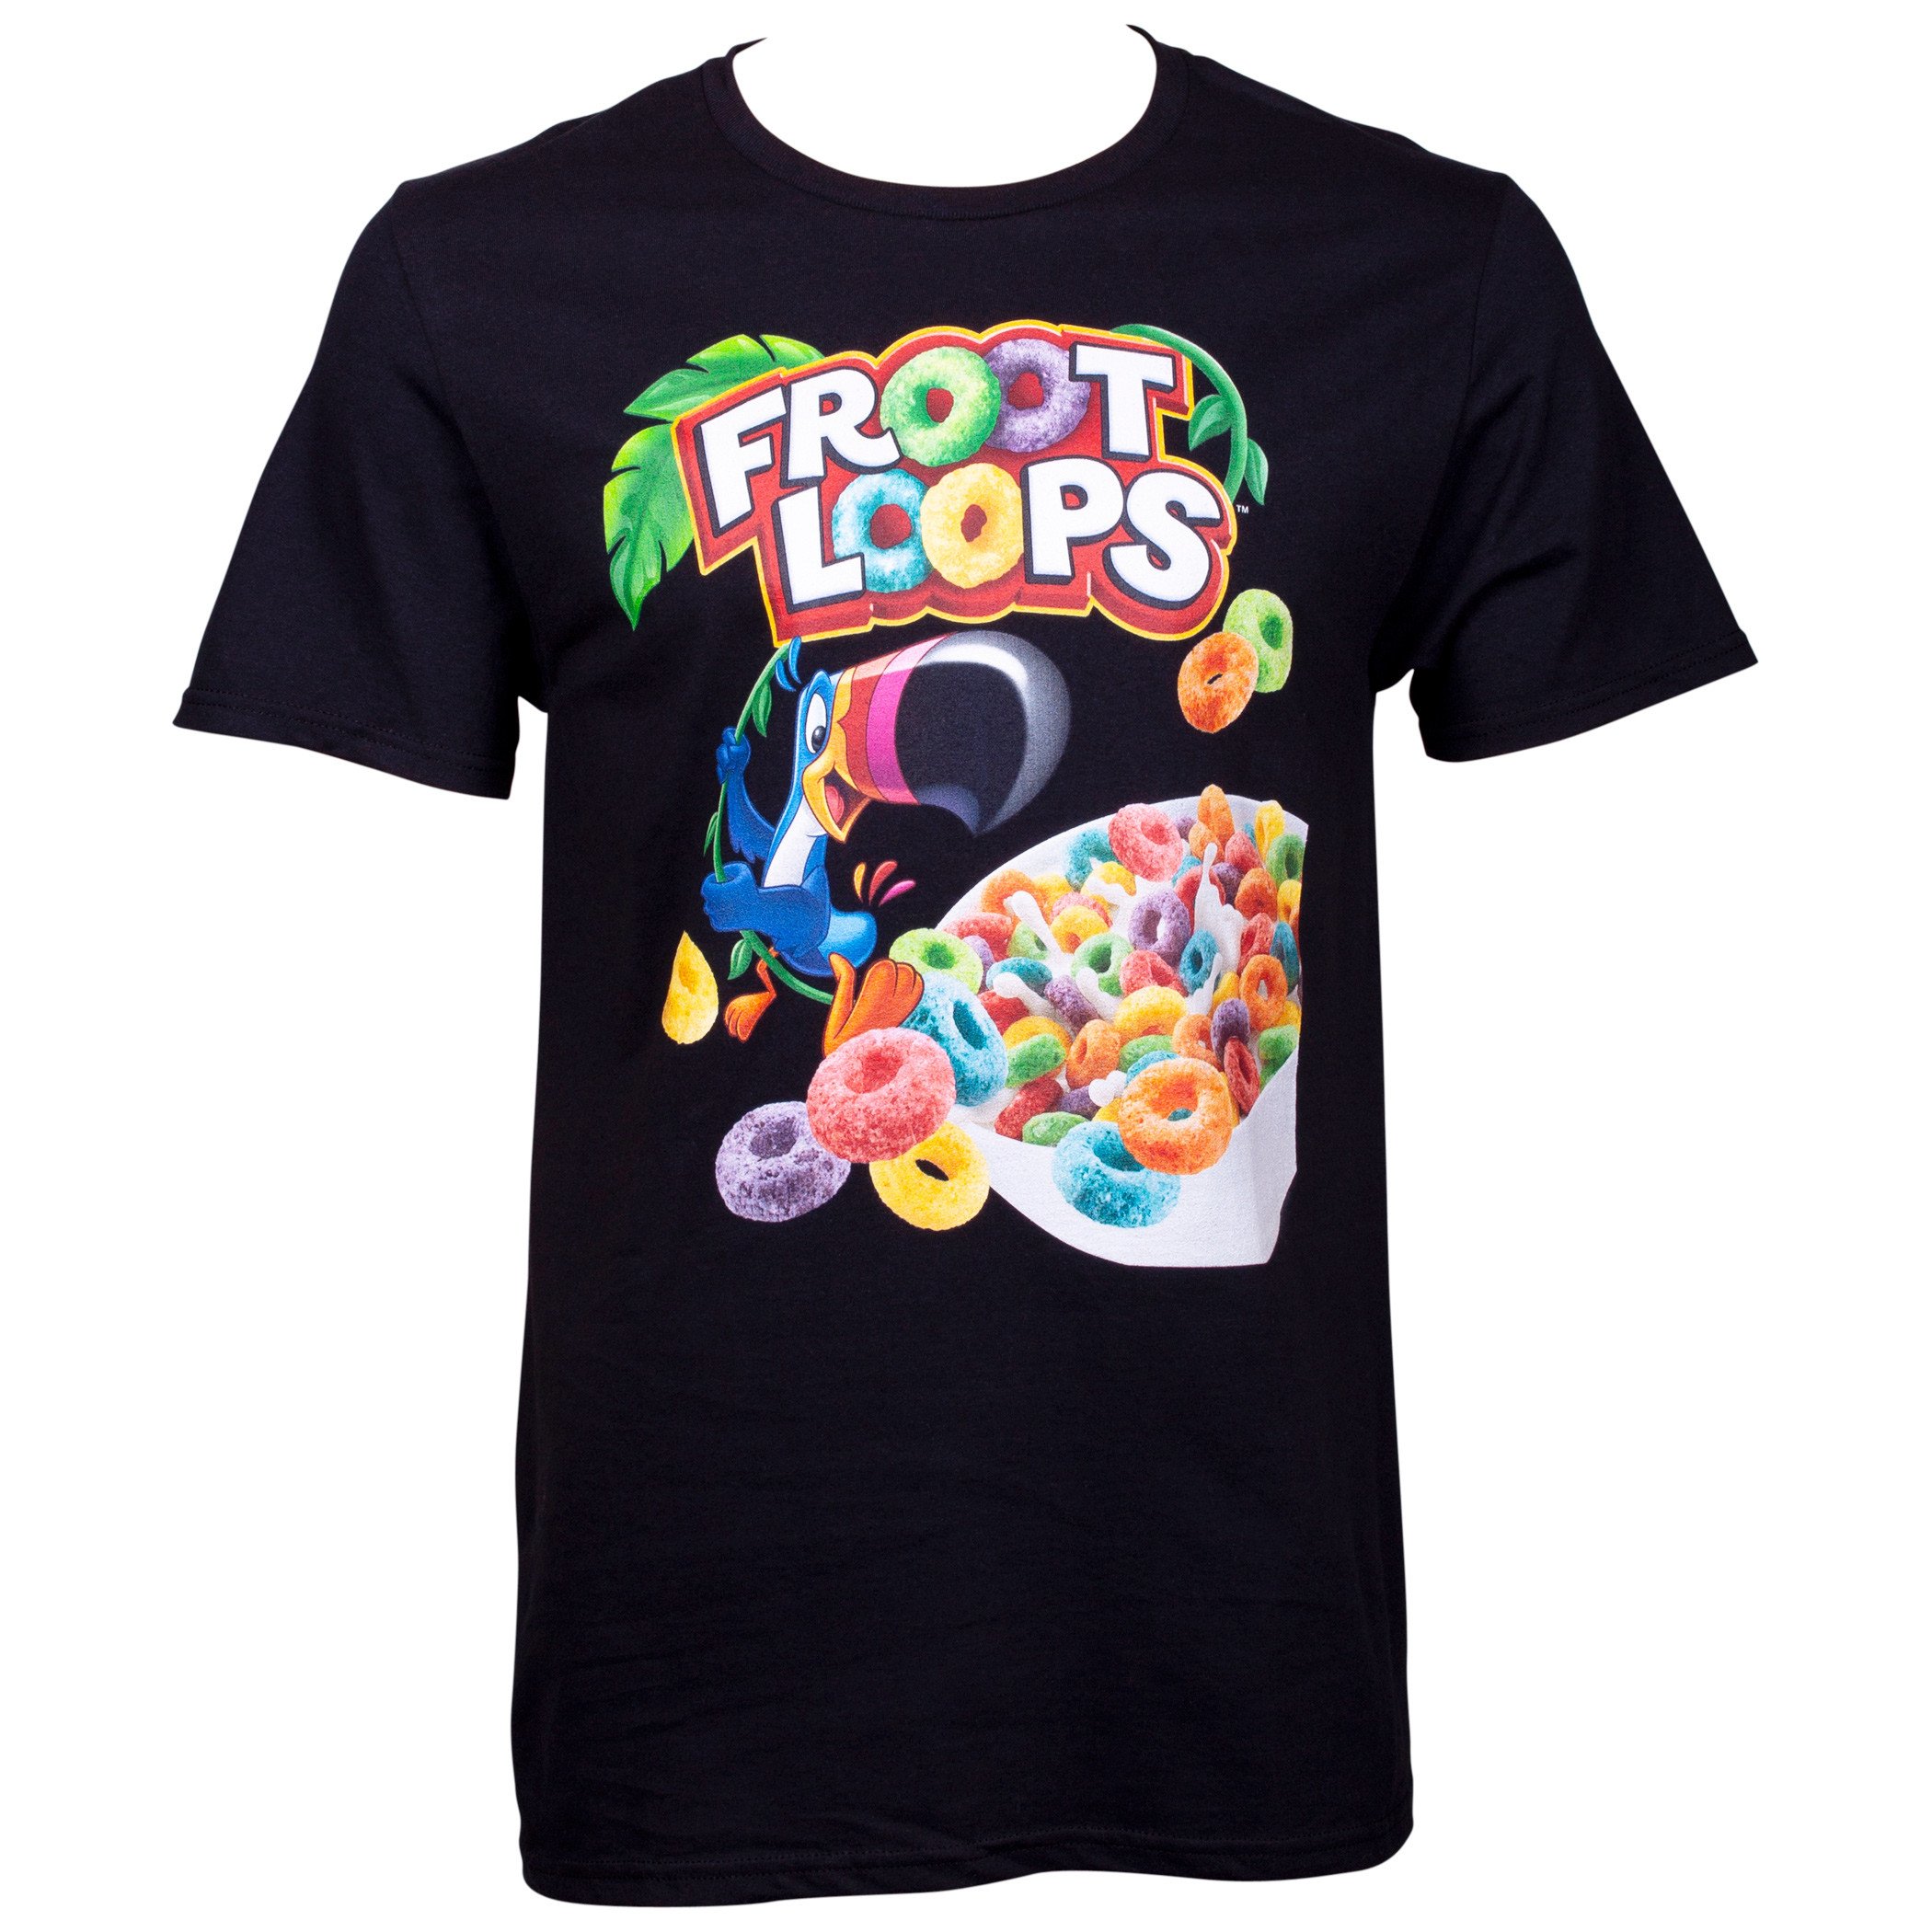 Froot Loops Fruit Cereal Short Sleeve T-Shirt